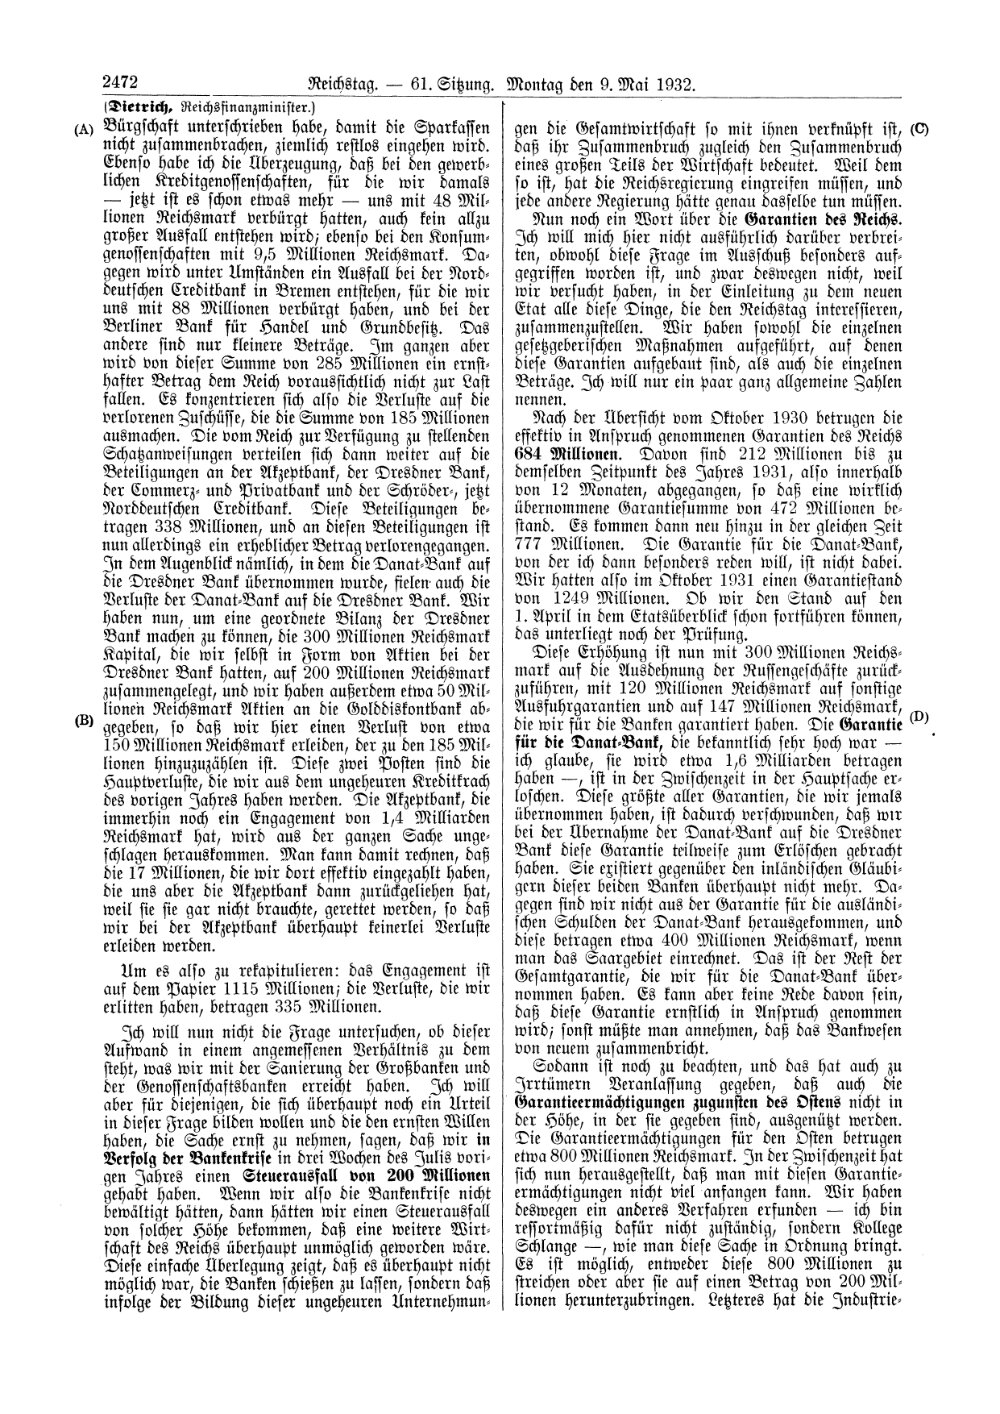 Scan of page 2472